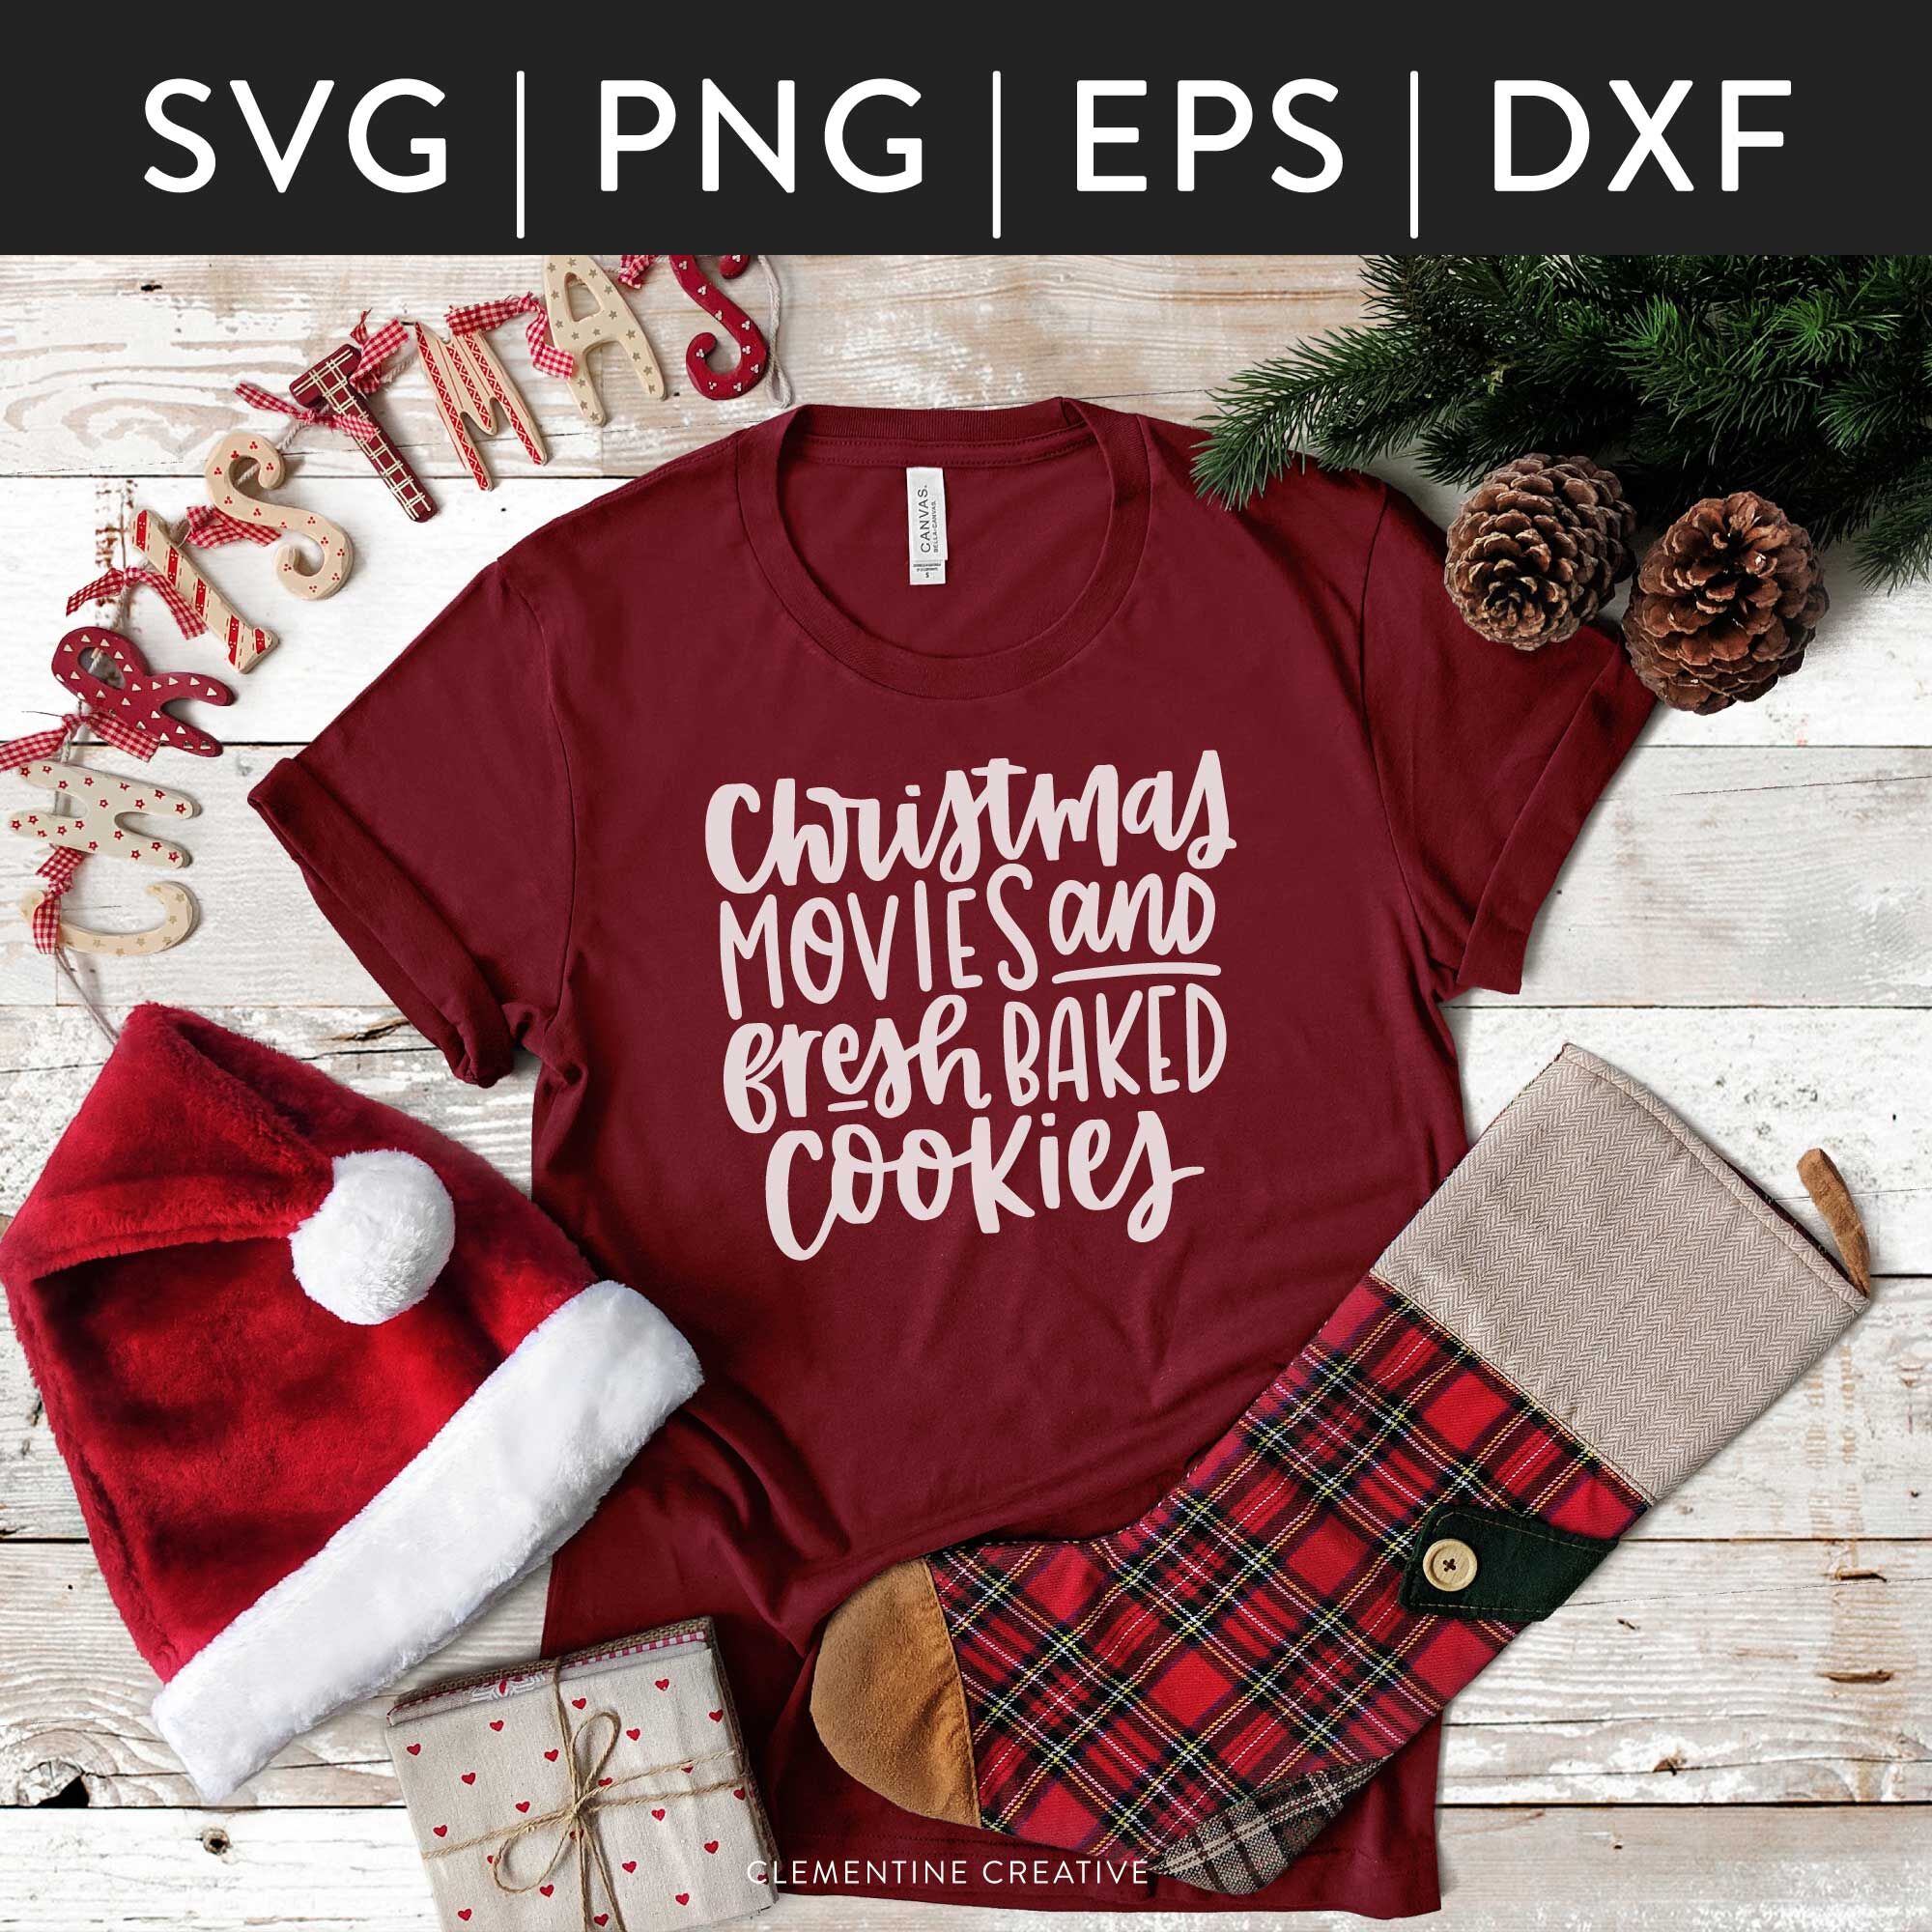 Download Free Christmas Quote Svg Christmas Movies And Fresh Baked Cookies Svg SVG DXF Cut File